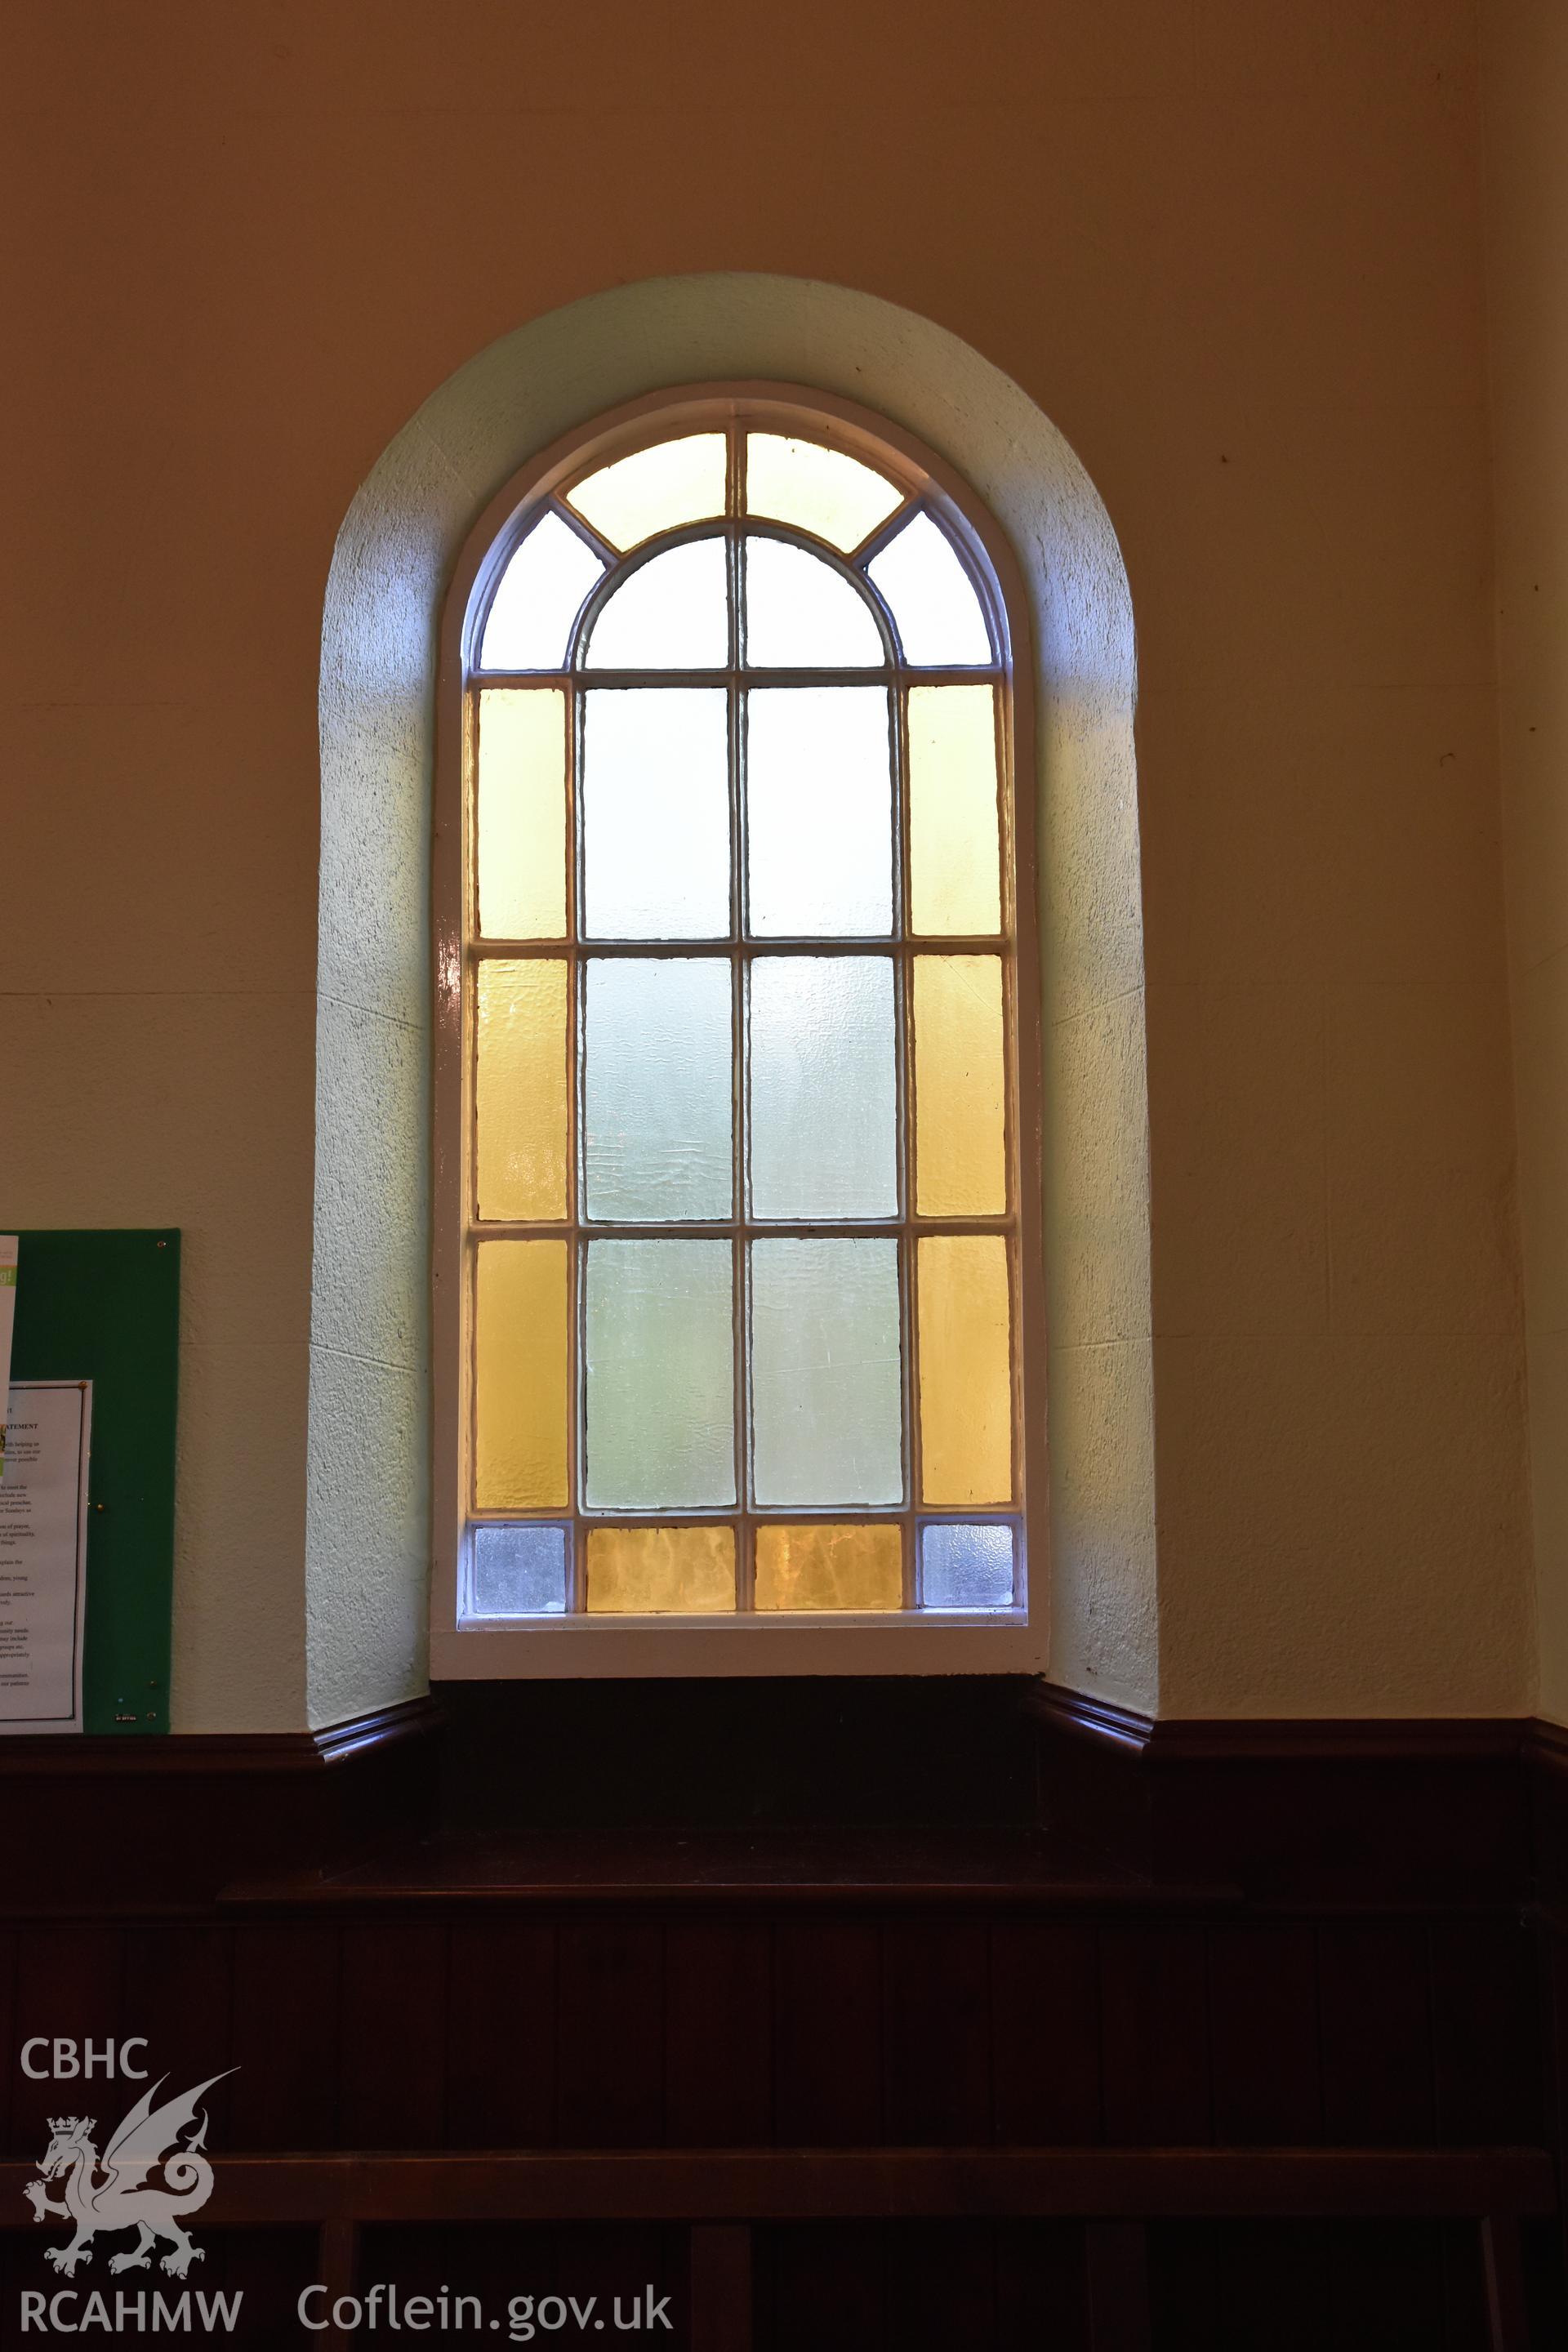 Interior view of stained glass window at Hyssington Primitive Methodist Chapel, Hyssington, Churchstoke. Photographic survey conducted by Sue Fielding on 7th December 2018.